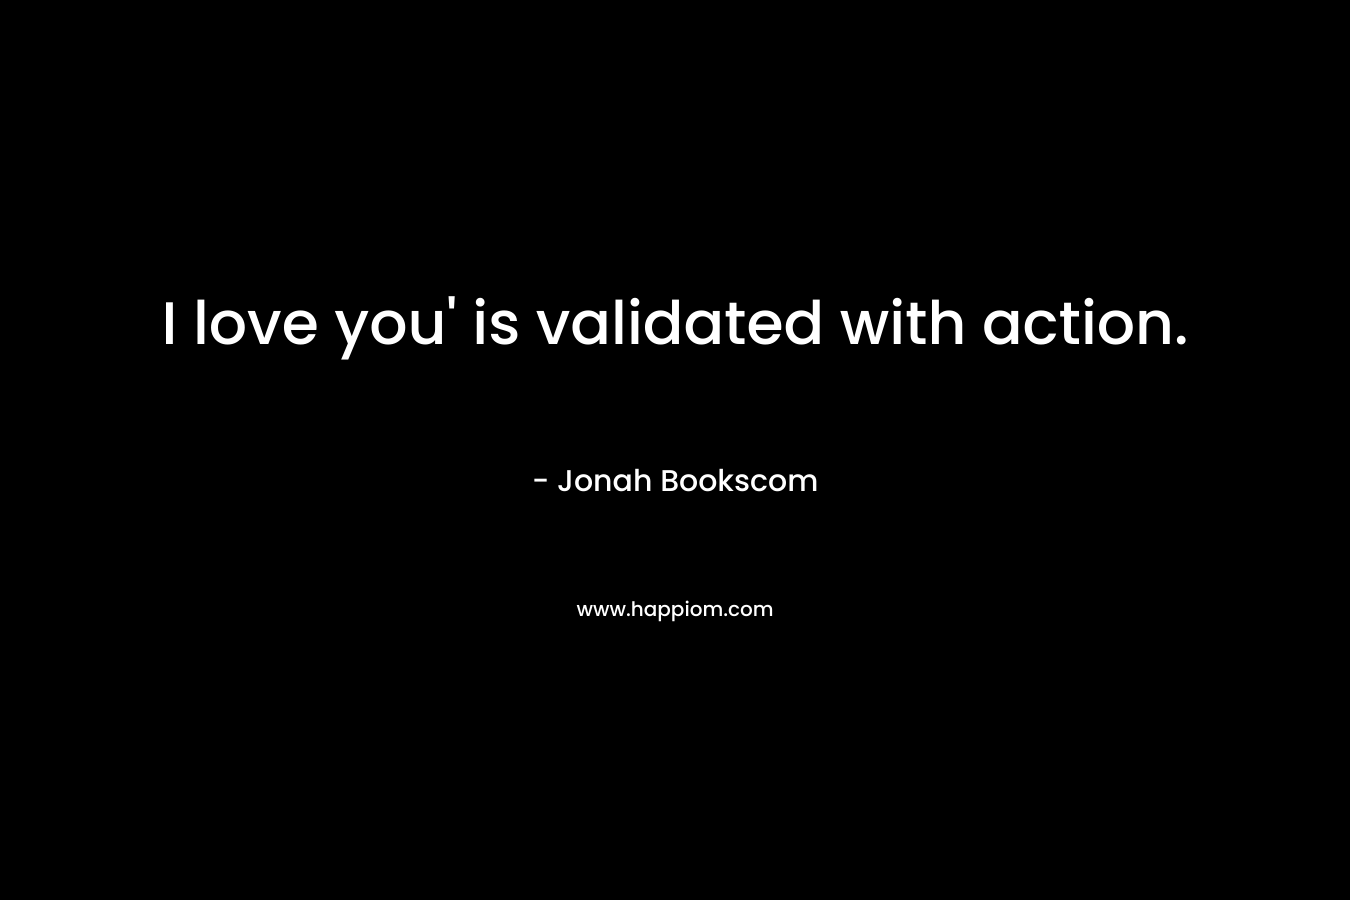 I love you’ is validated with action. – Jonah Bookscom